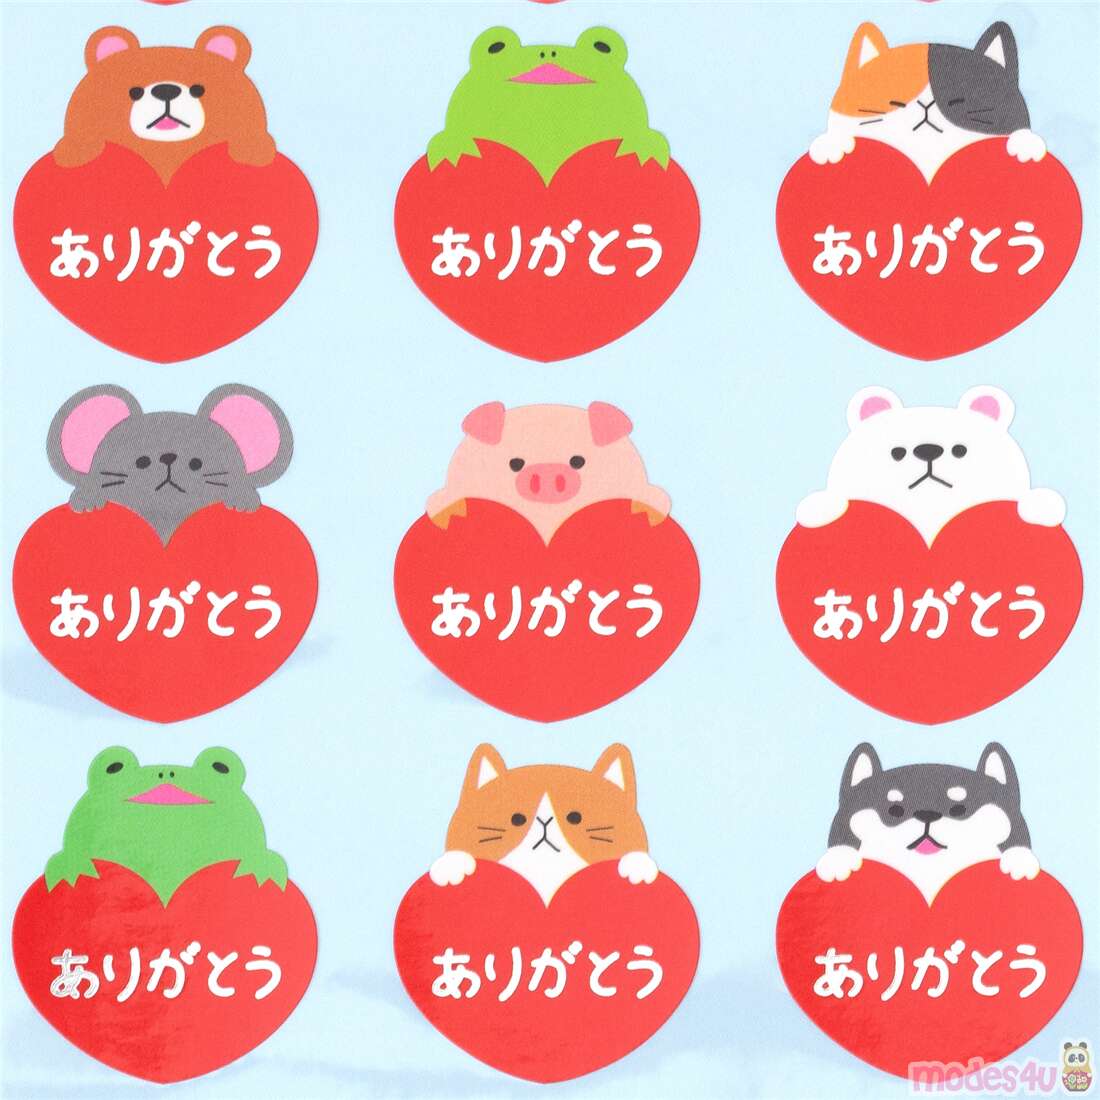 cute kawaii animal and heart thank you stickers by Mind Wave - modeS4u